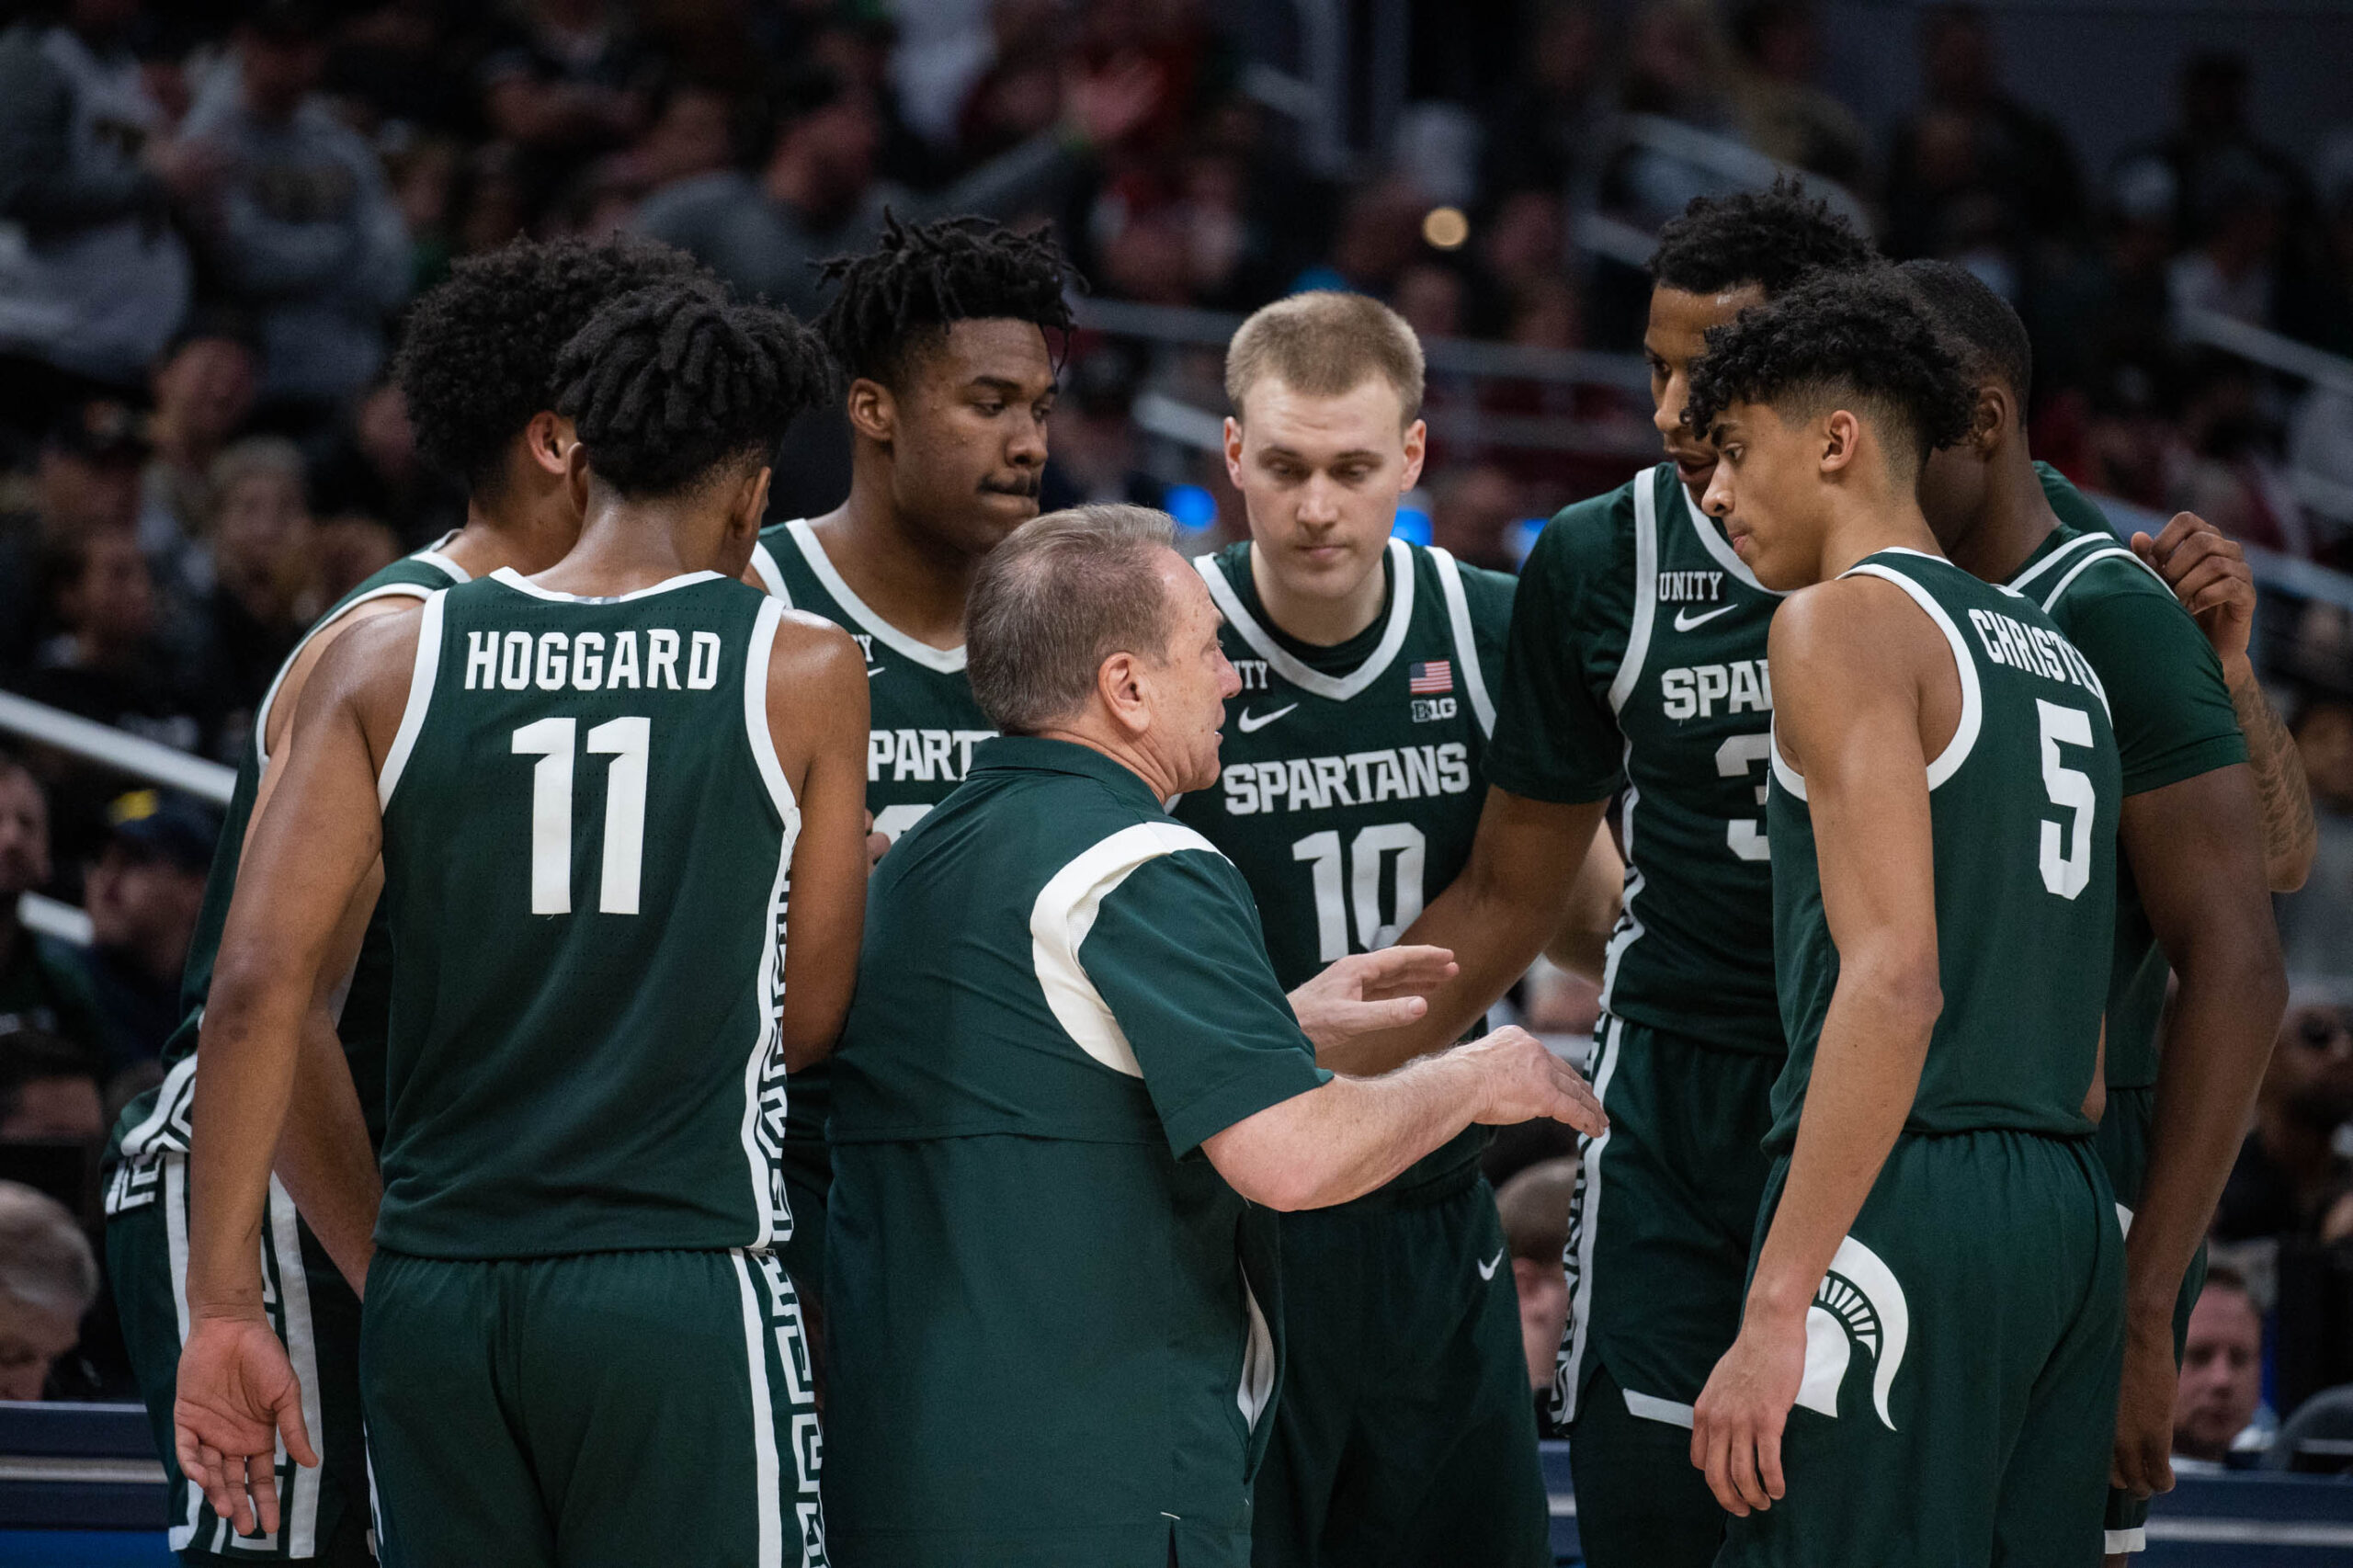 Michigan State head basketball coach Tom Izzo talks to his team during a timeout.